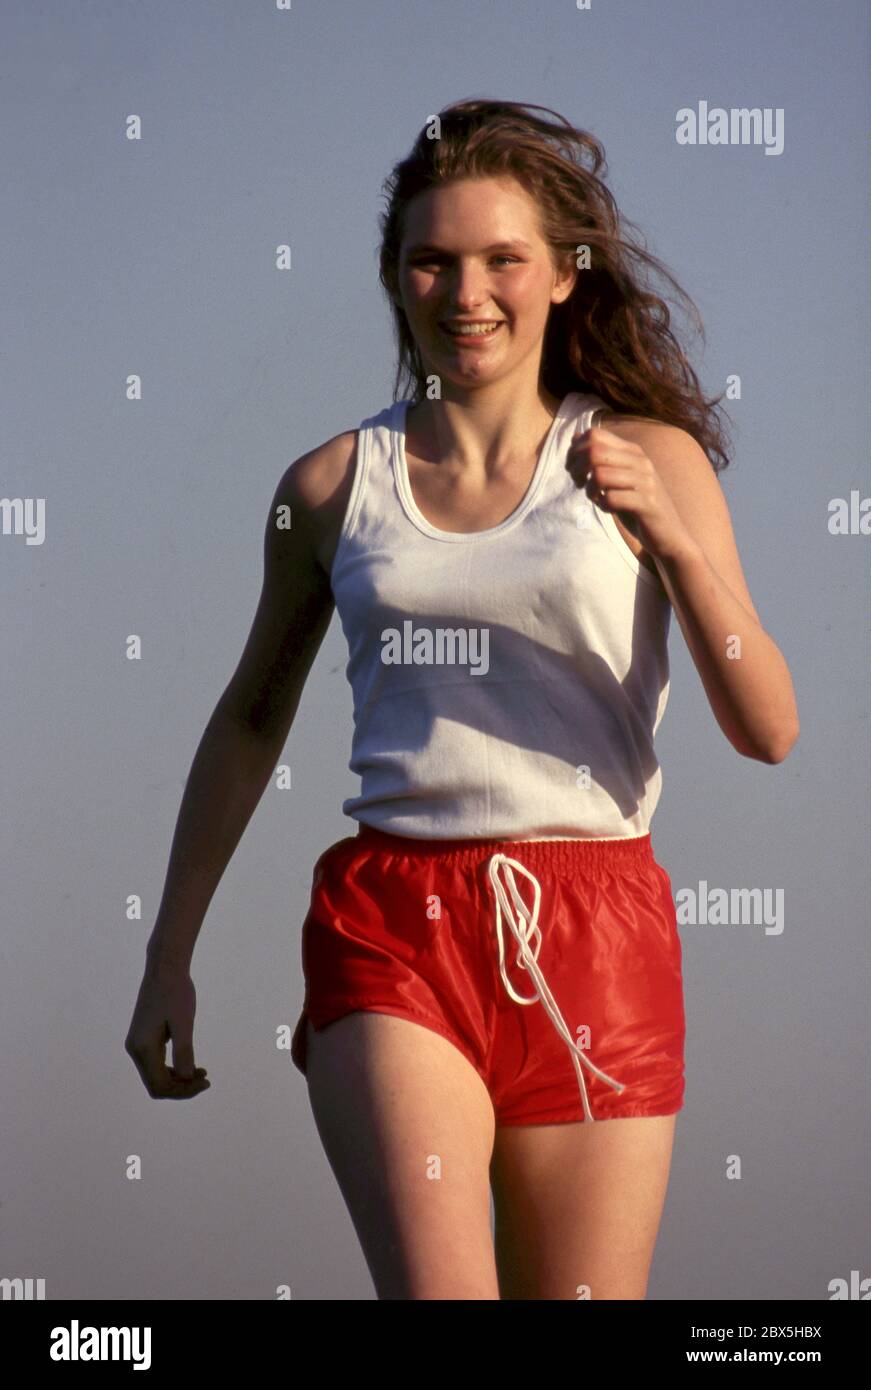 An 18 year old model jogging Photo by Tony Henshaw Stock Photo